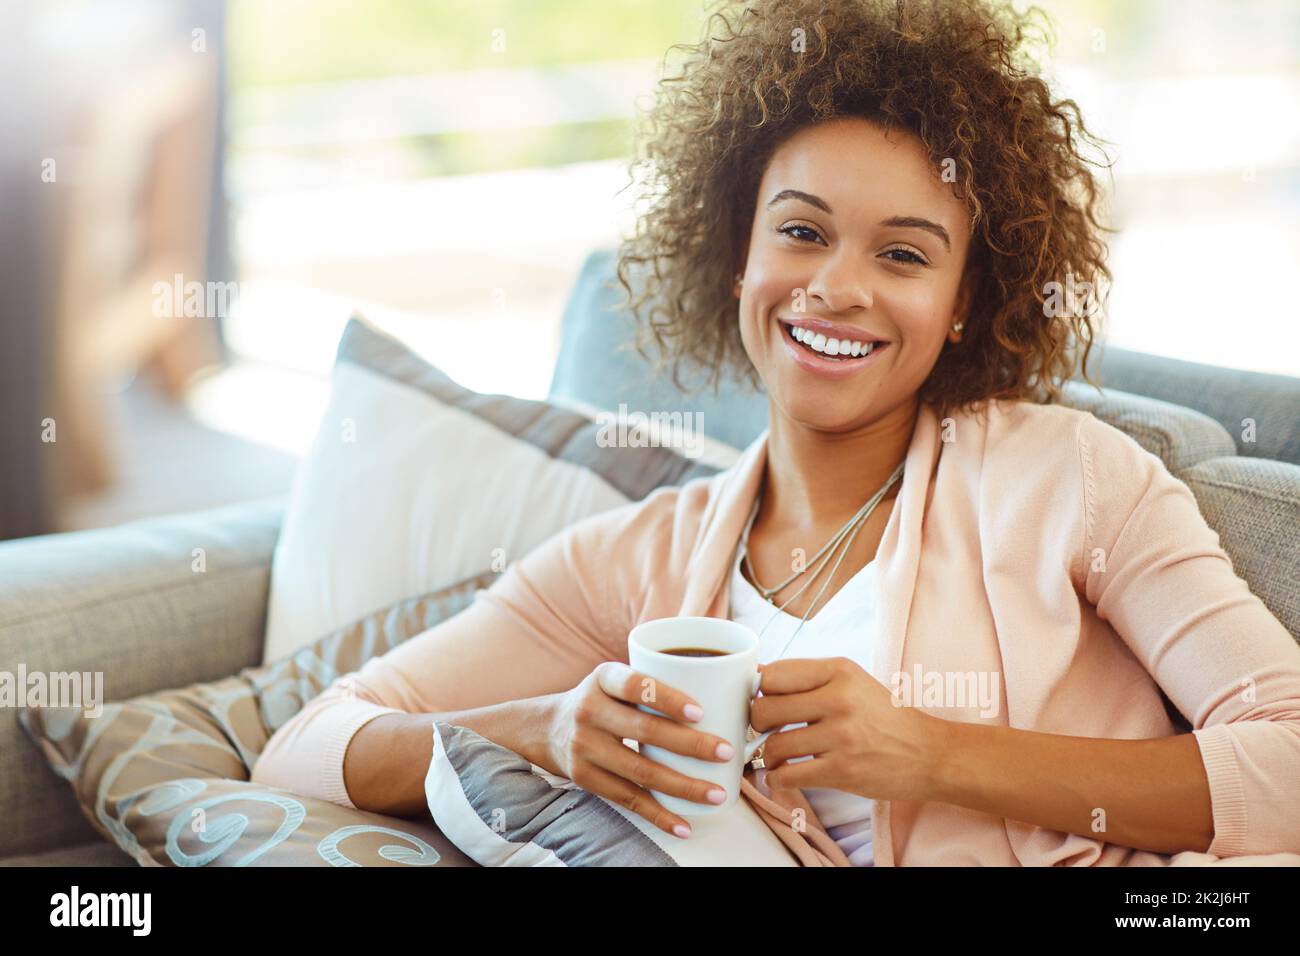 Tea time is me time. Portrait of a young woman relaxing with a warm beverage at home. Stock Photo